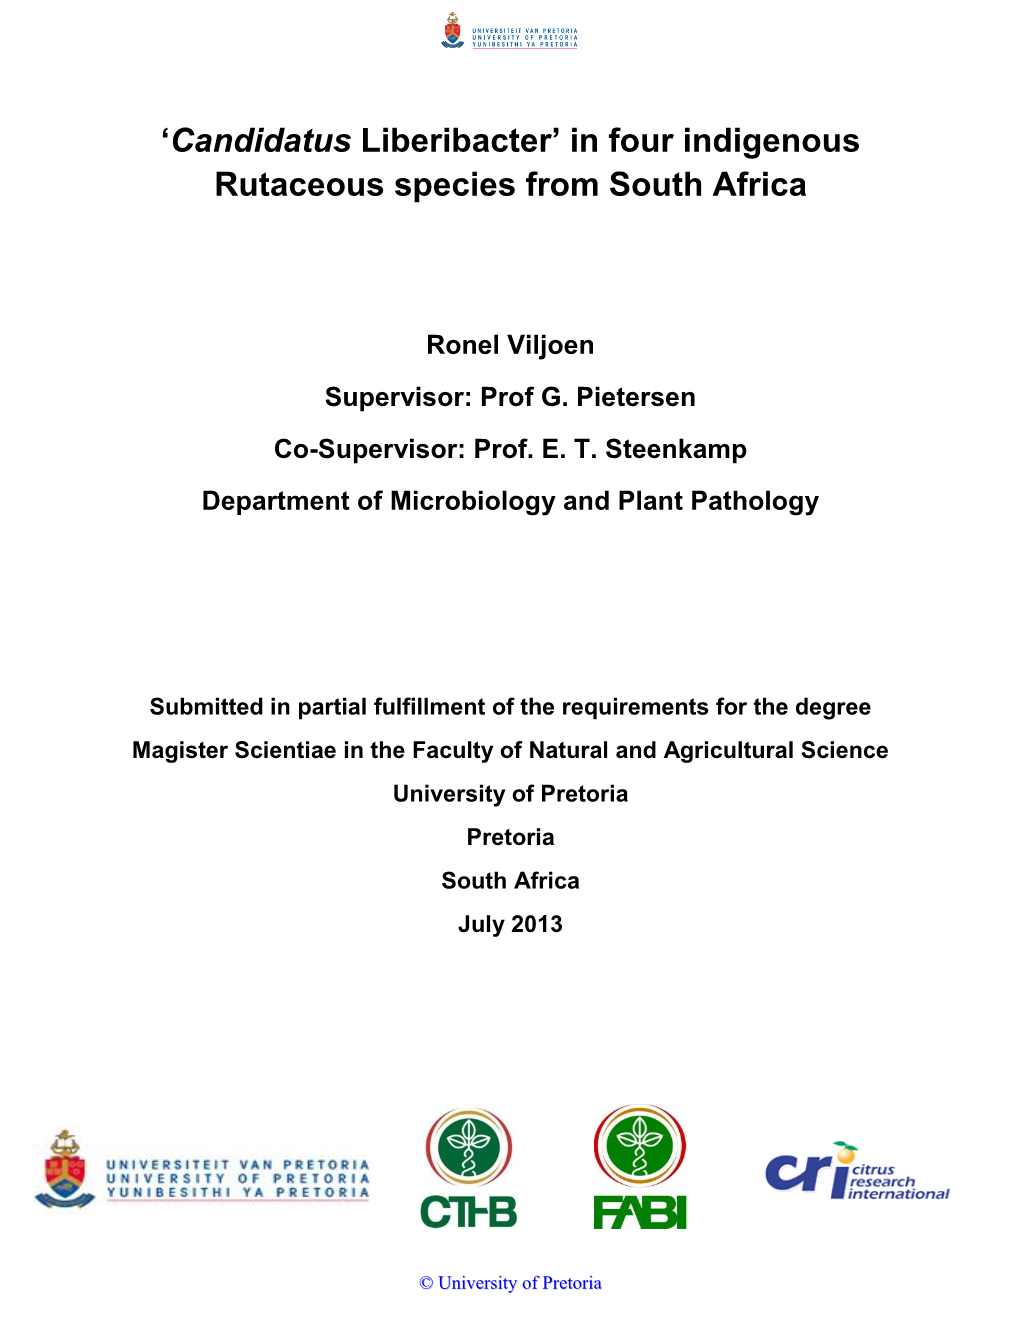 Candidatus Liberibacter’ in Four Indigenous Rutaceous Species from South Africa